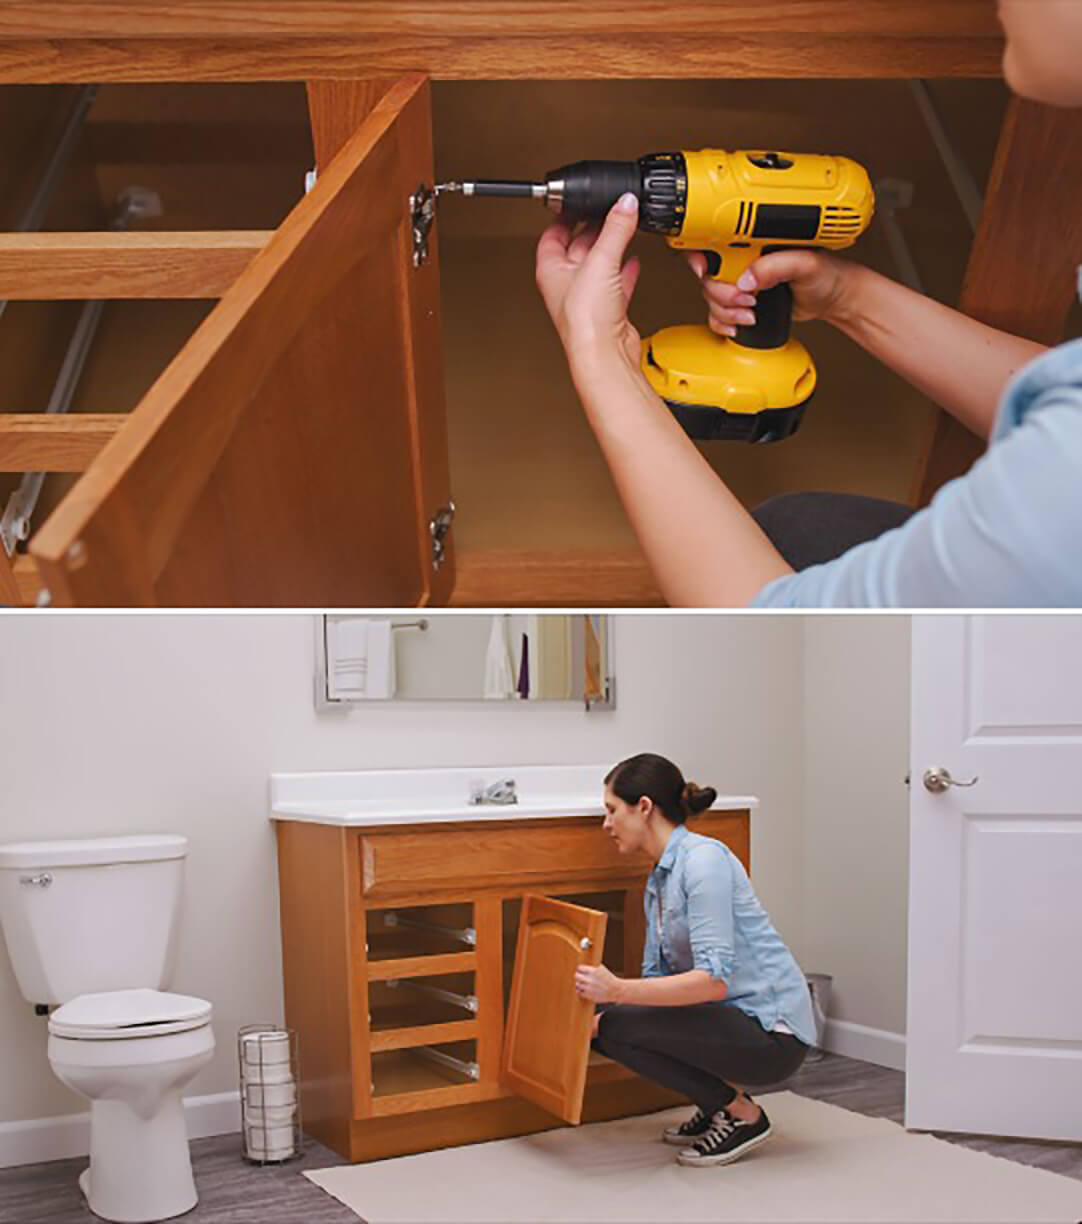 A woman is using a power drill to remove screws from a bathroom vanity door.